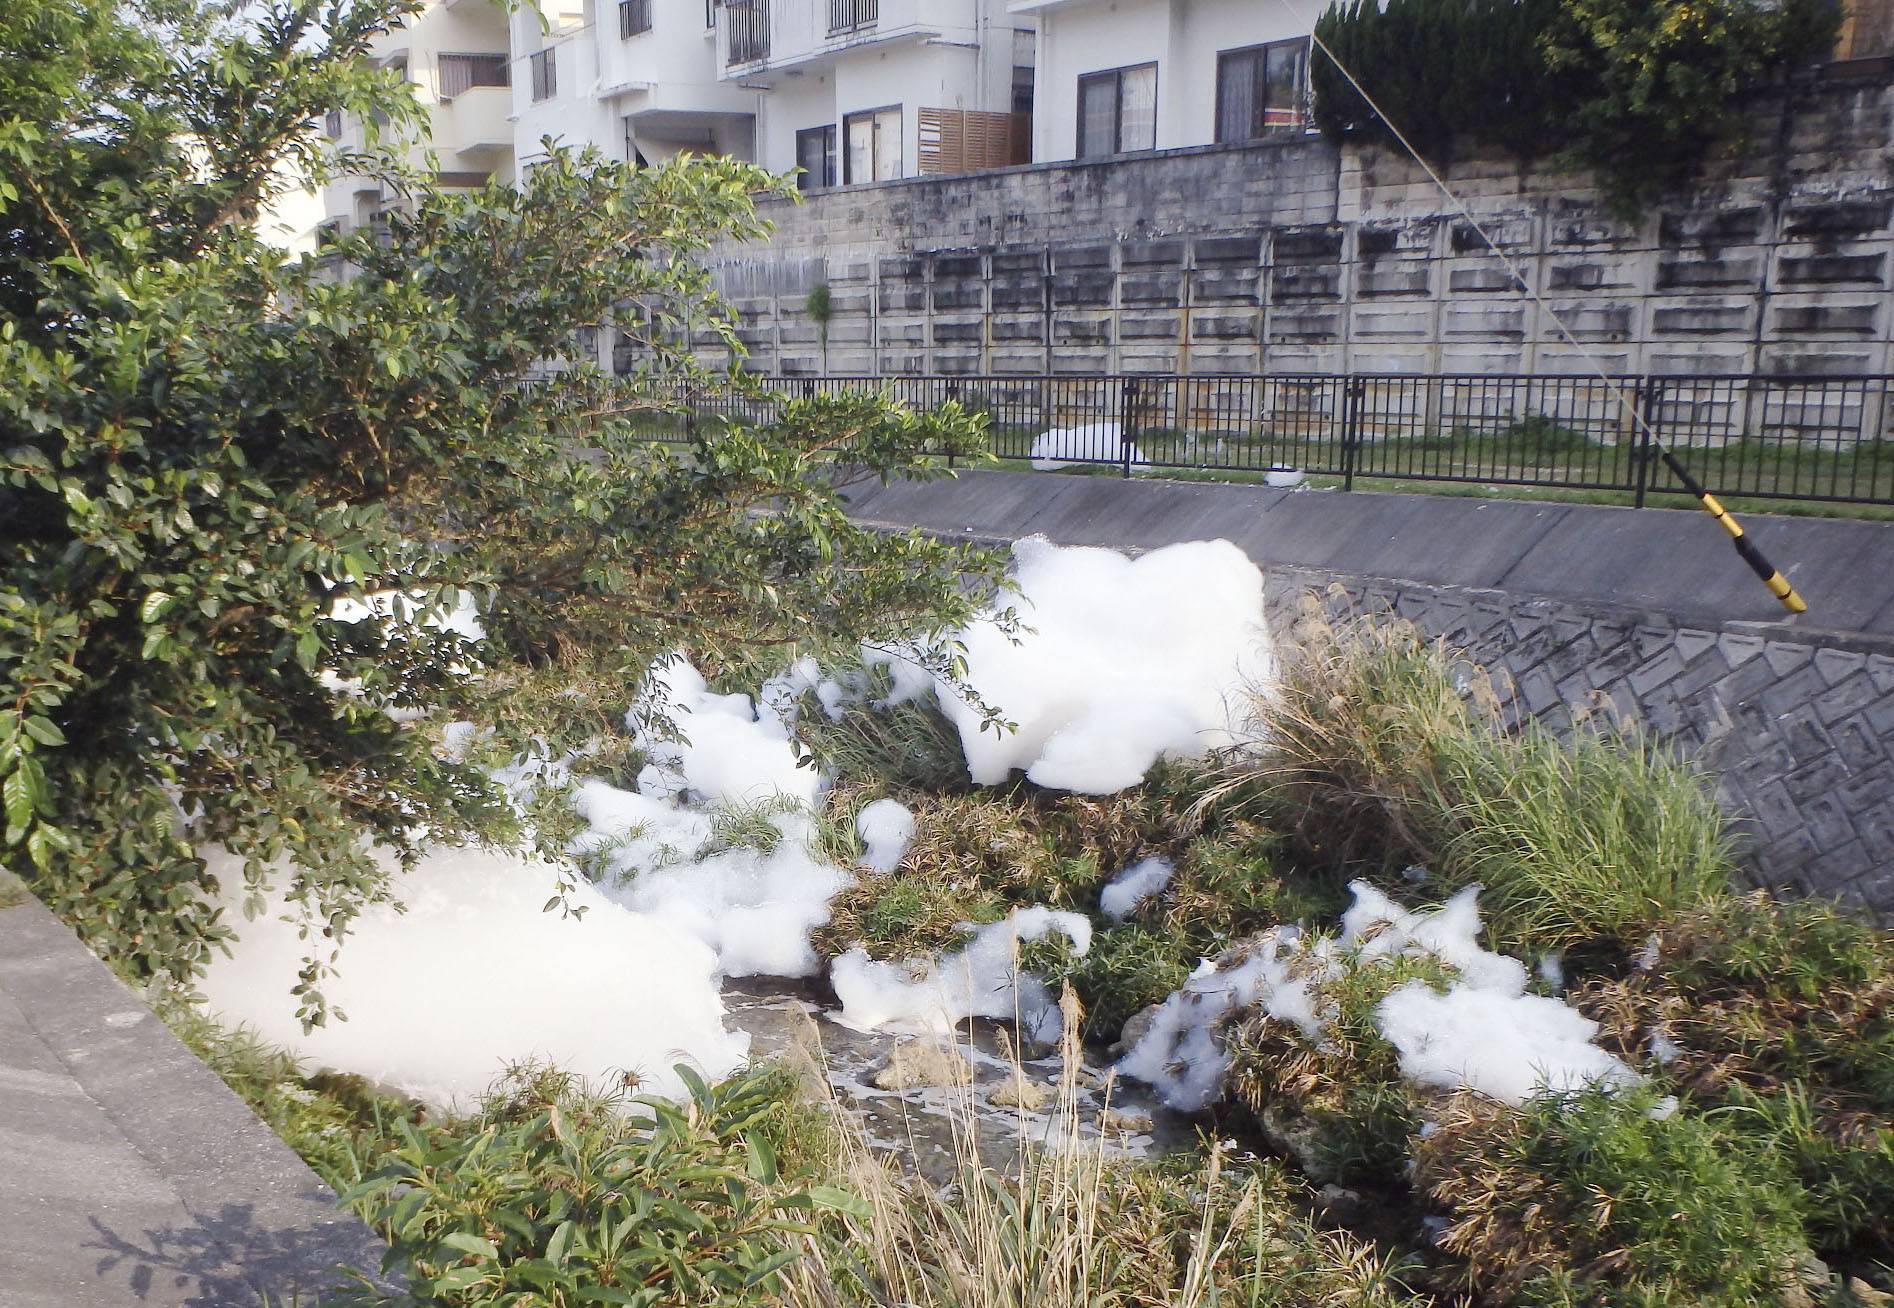 Firefighting foam containing the potentially hazardous chemical PFOS are seen on April 11, 2020, after spilling out from U.S. Marine Corps Air Station Futenma into a residential area in the city of Ginowan, Okinawa Prefecture. | THE CITY OF GINOWAN / VIA KYODO